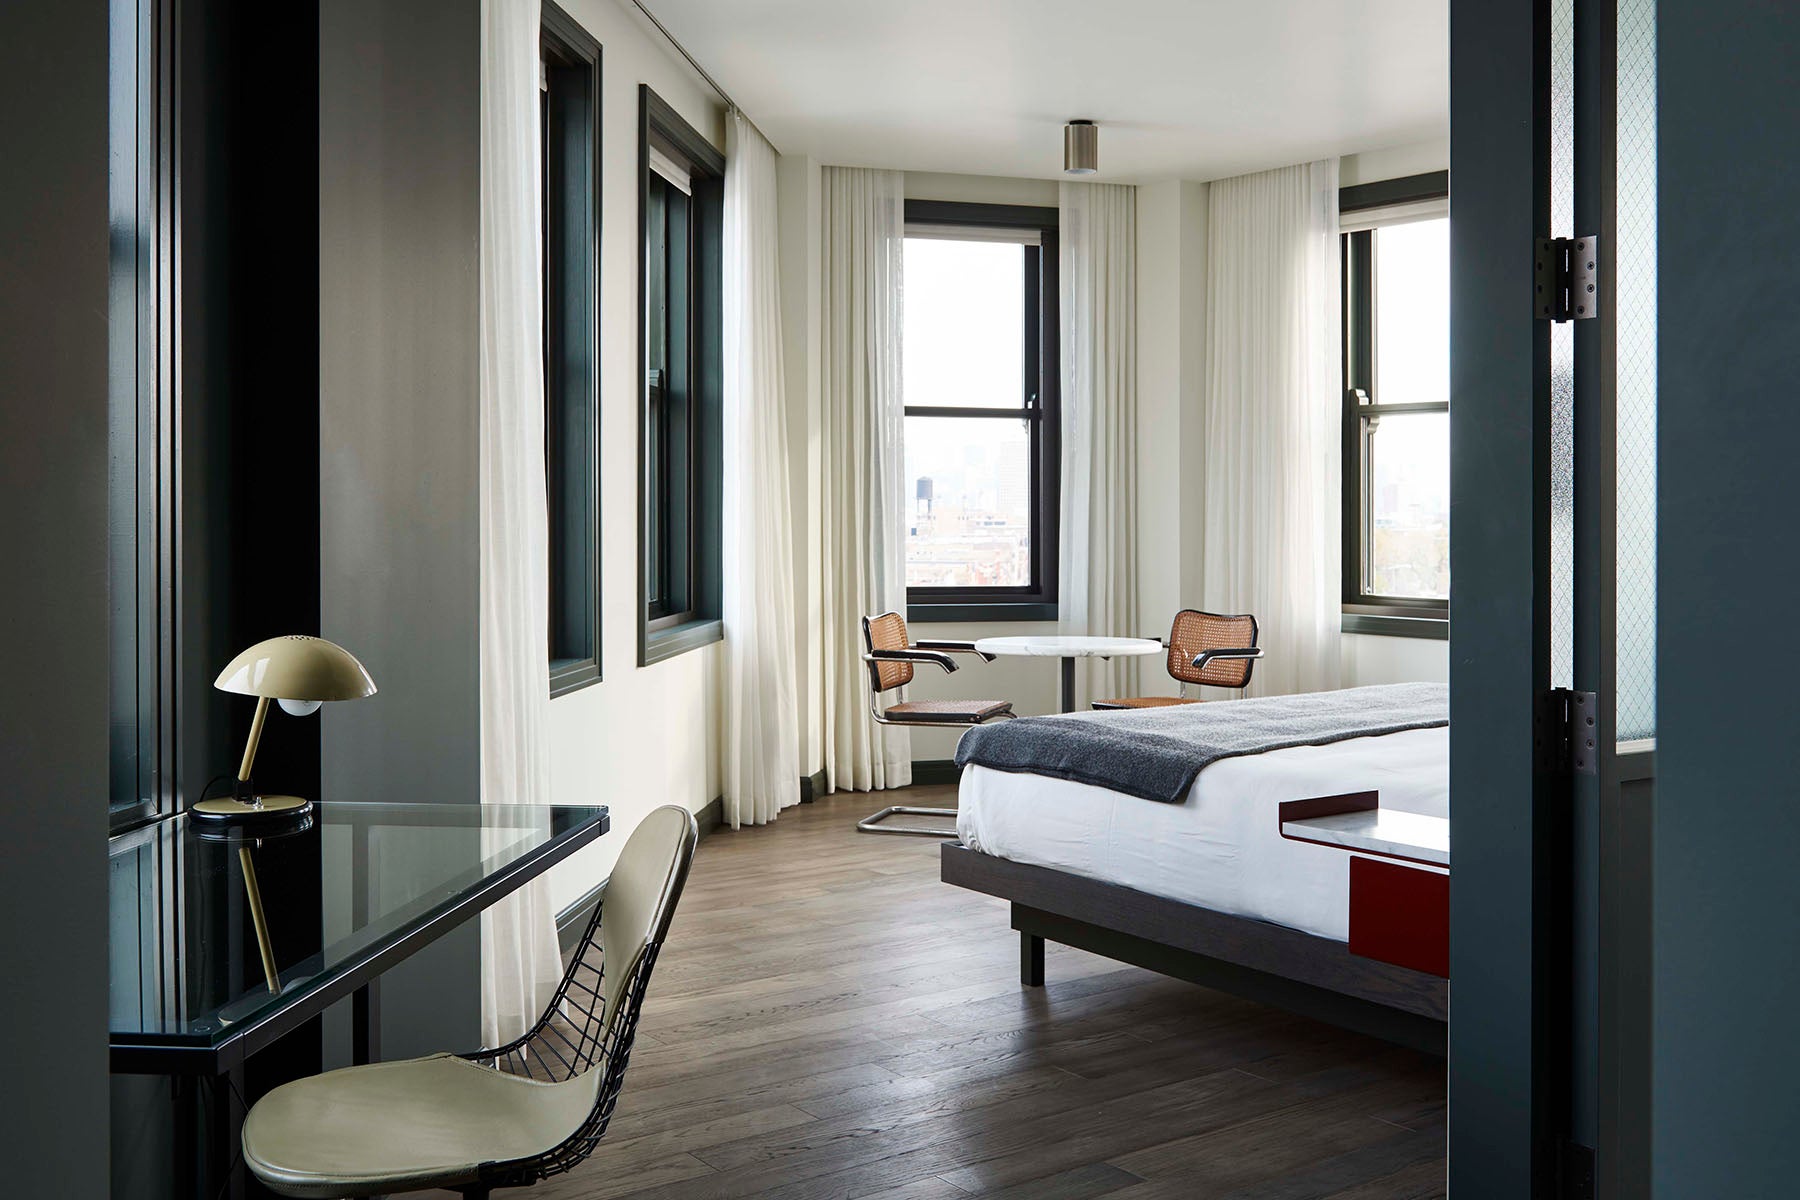 Panorama Suite at the Hotel Robey in Chicago (Photo: Courtesy of the Hotel Robey) - City Guide | SWAGGER Magazine